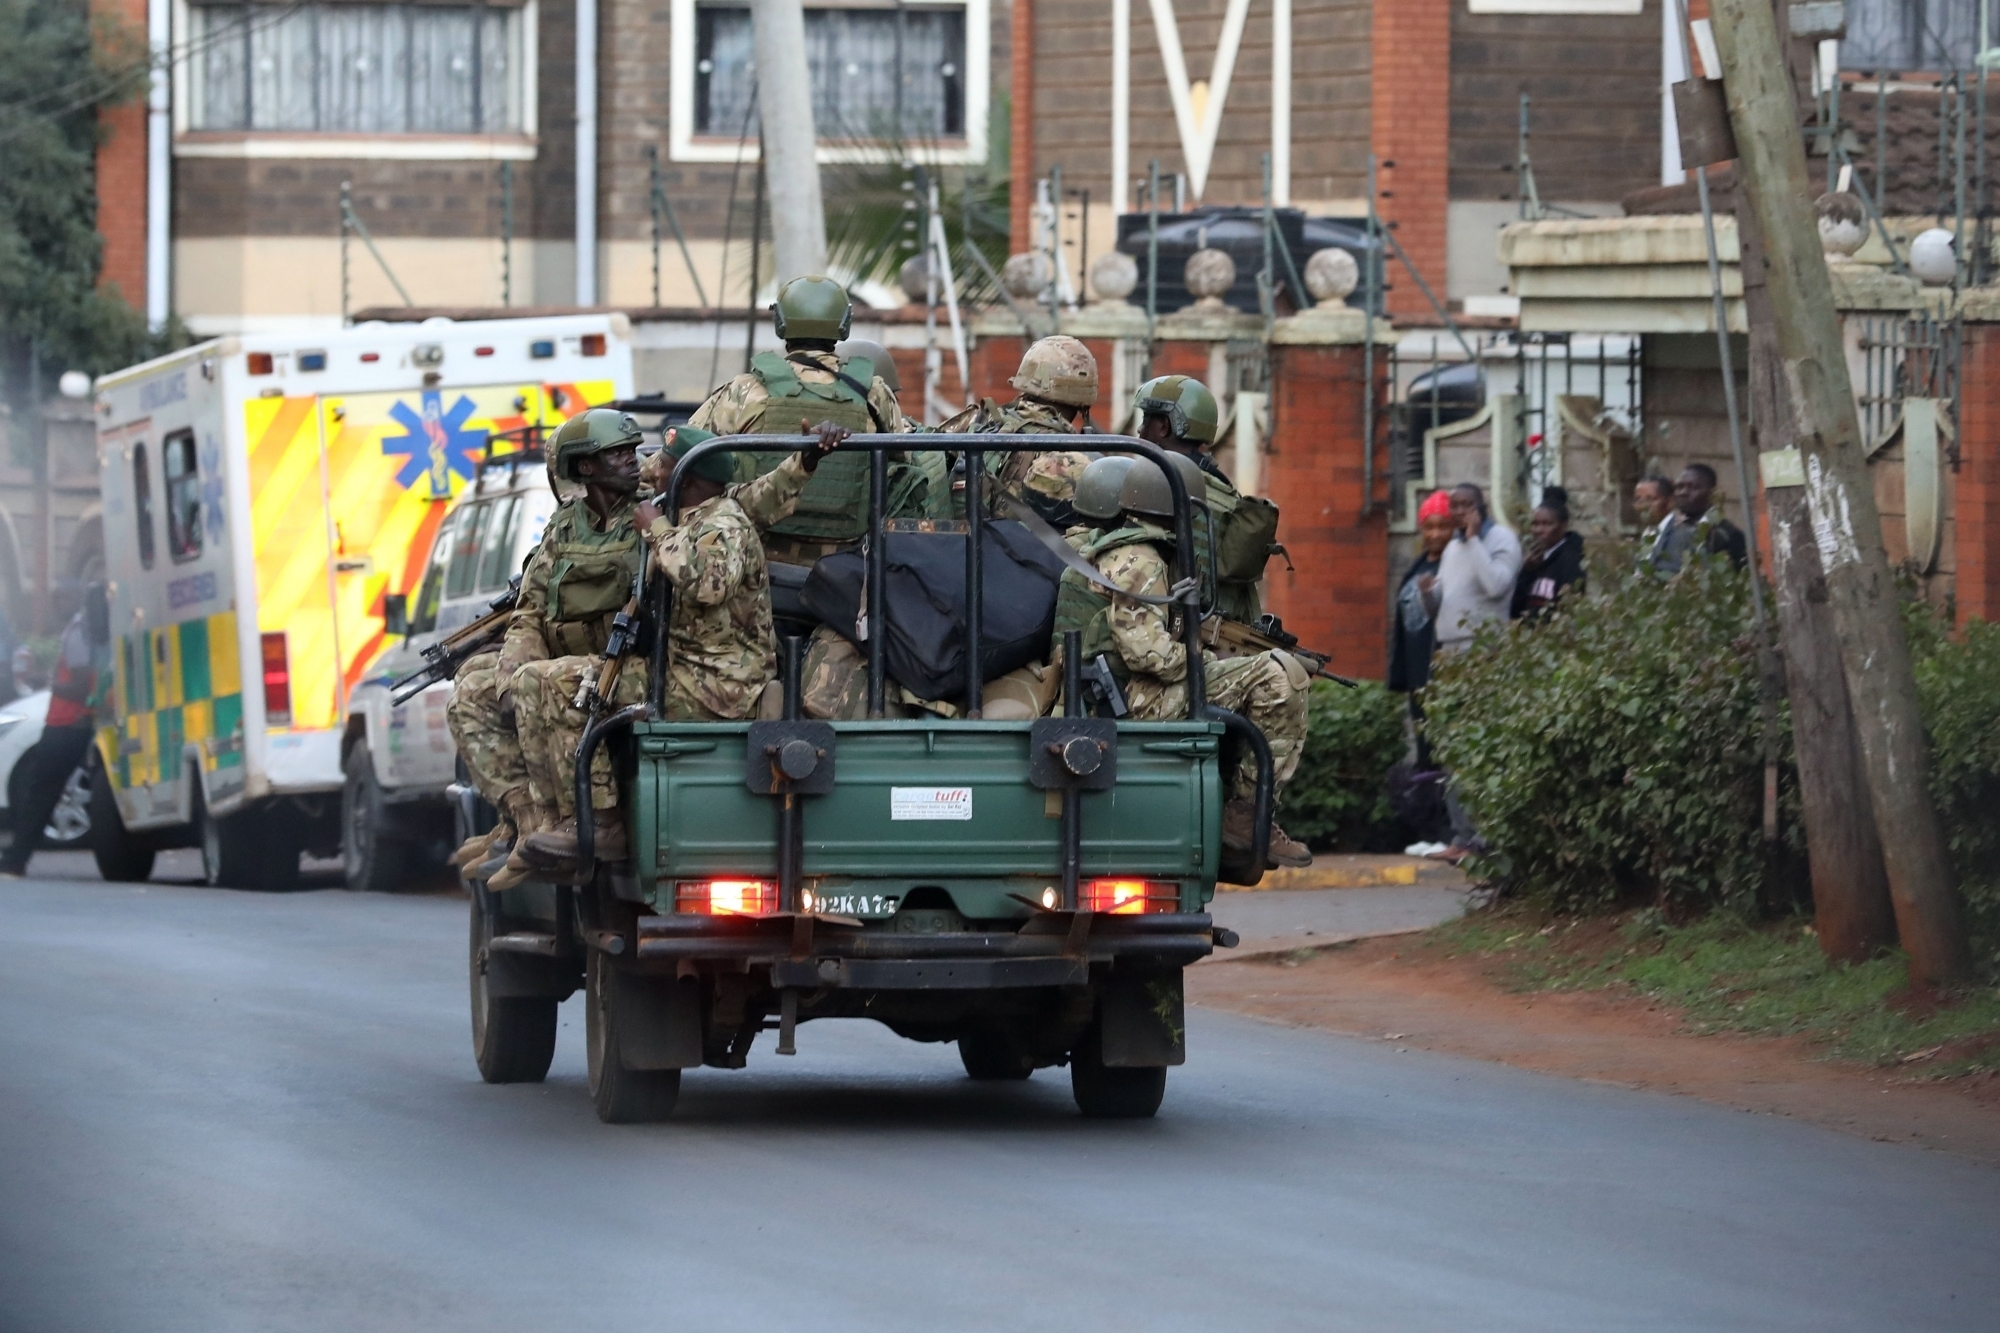 Three held for trying to enter British army camp: Kenyan police